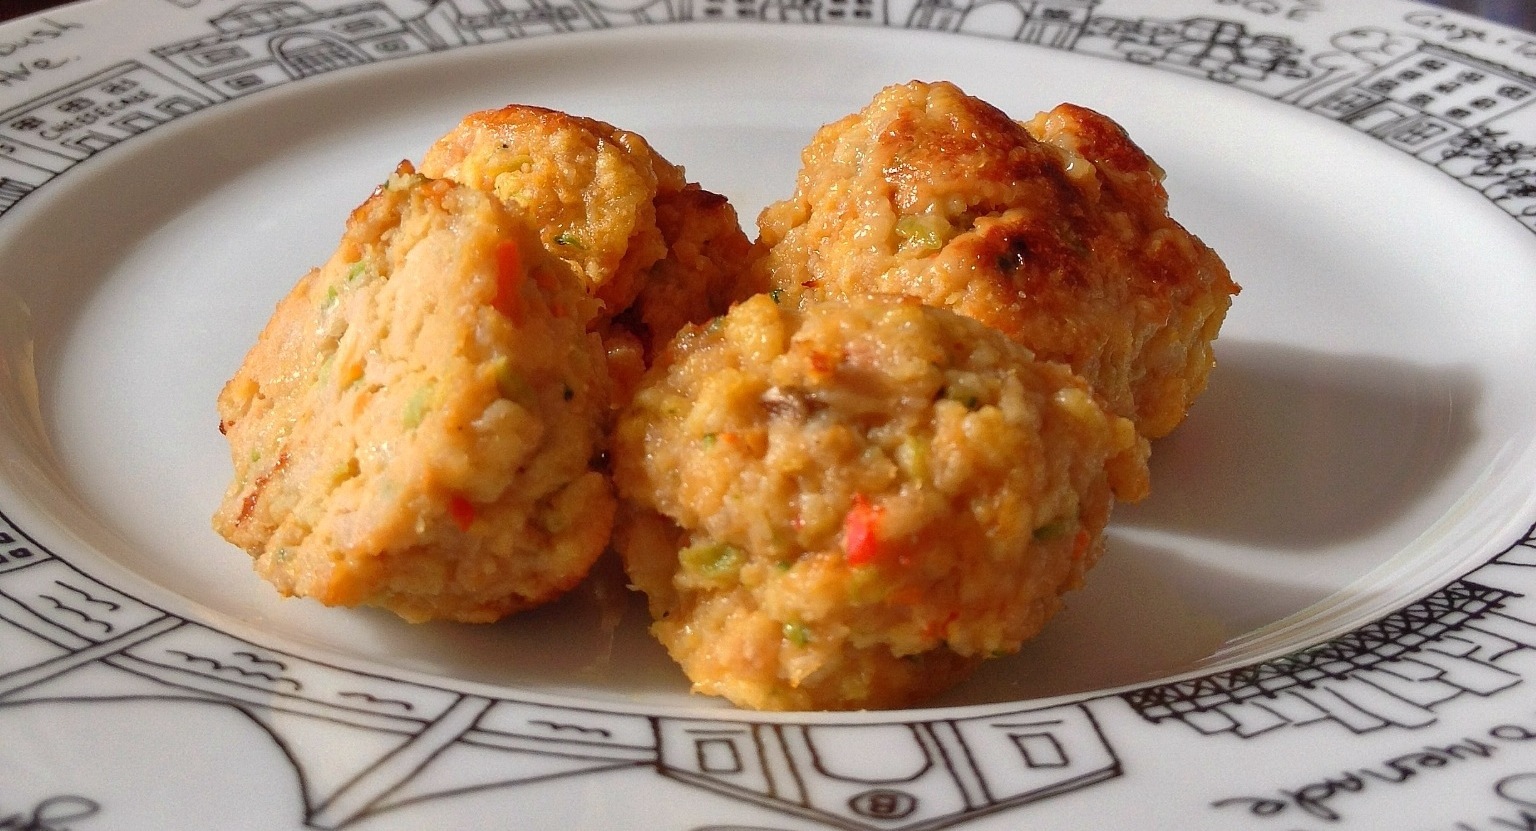 Turmeric-spiced Vegetable and Chicken Meatballs for Babies